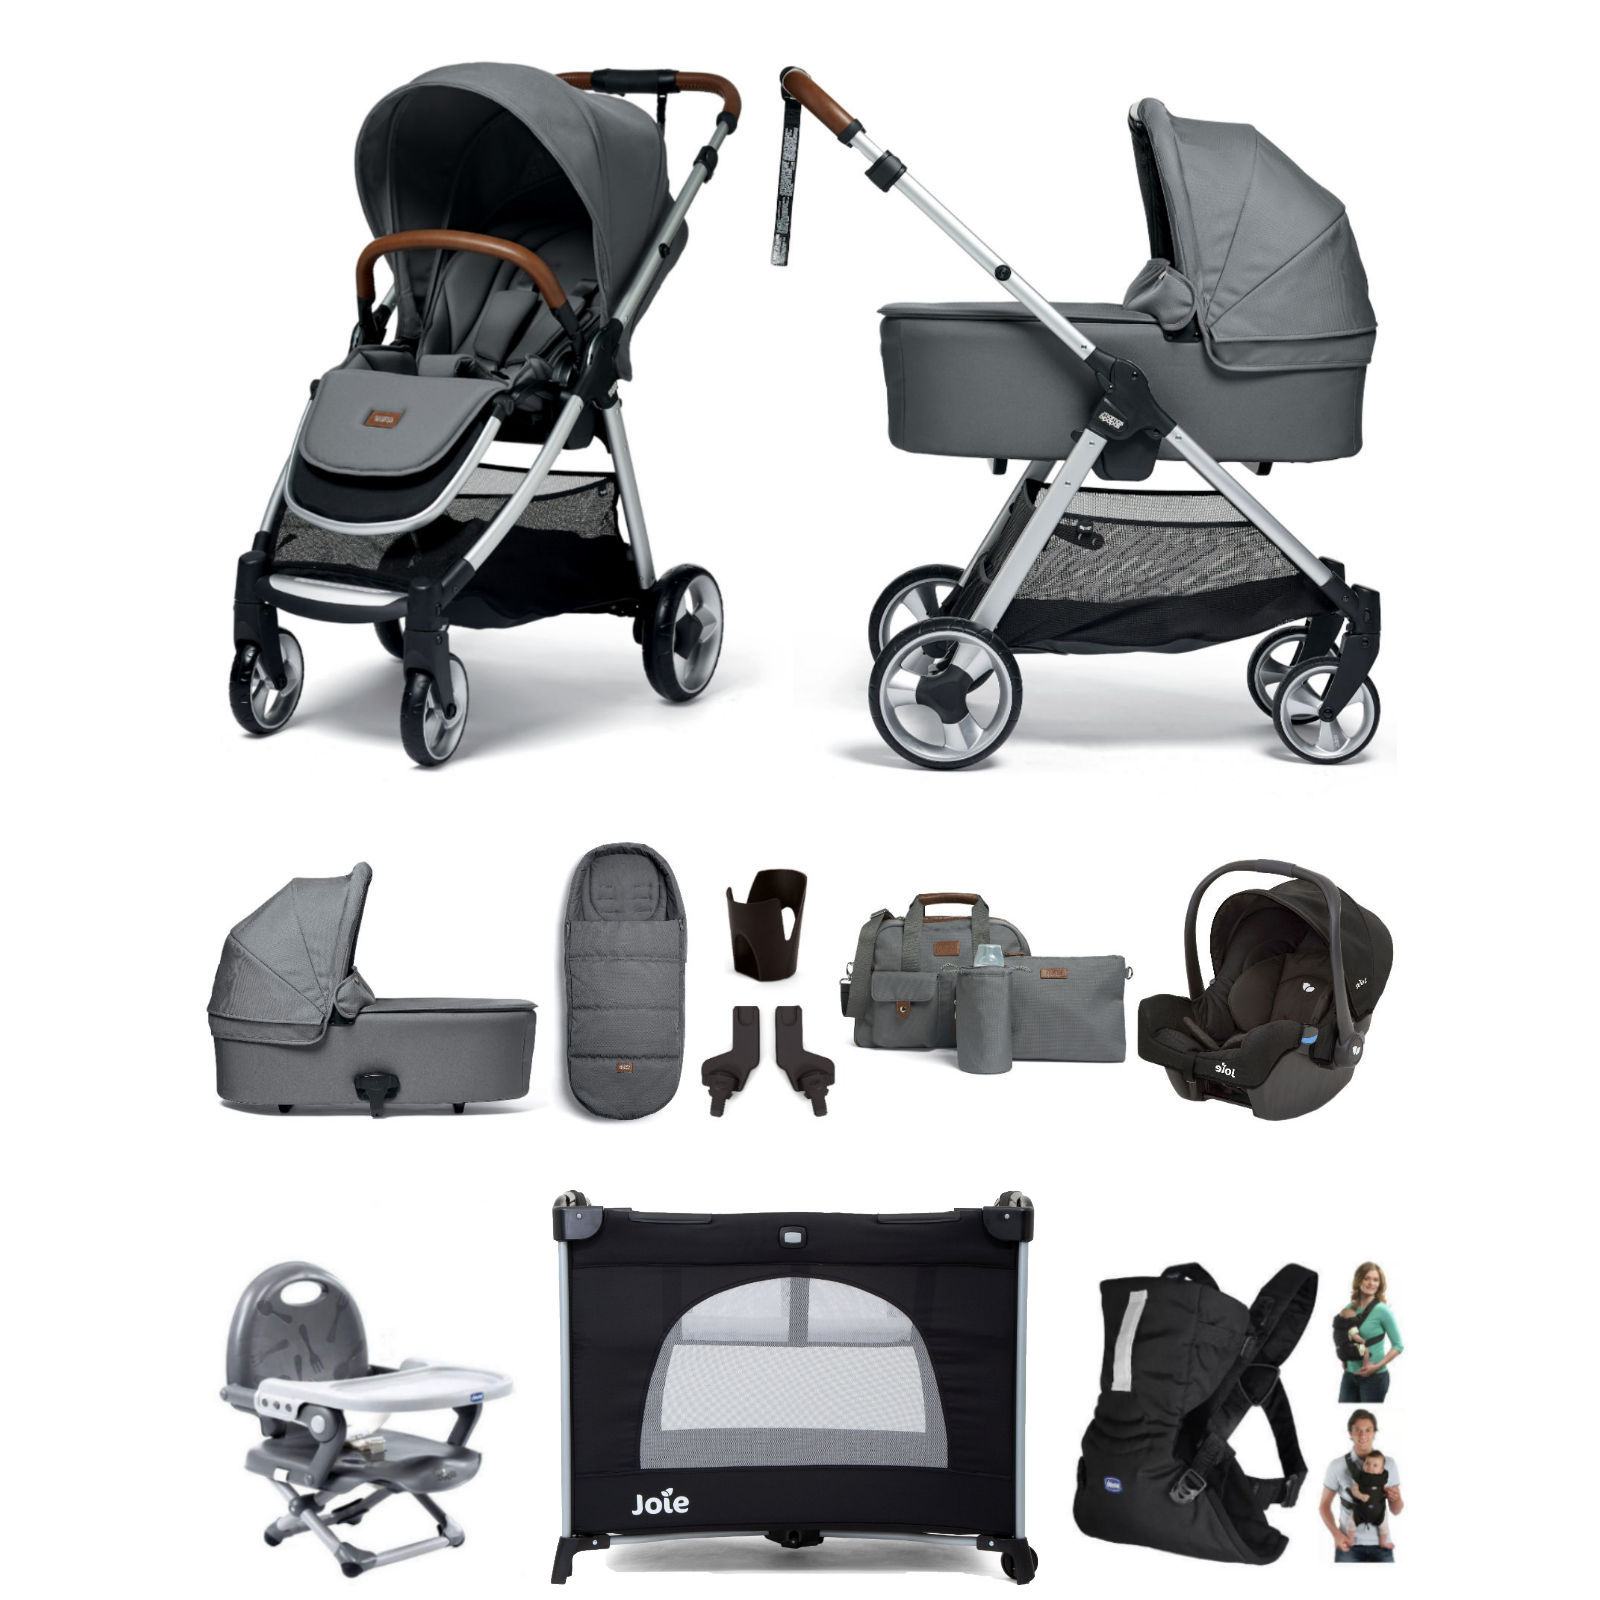 Mamas & Papas Flip XT2 10pc Essentials (Gemm Car Seat) Everything You Need Travel System Bundle with Carrycot - Fossil Grey